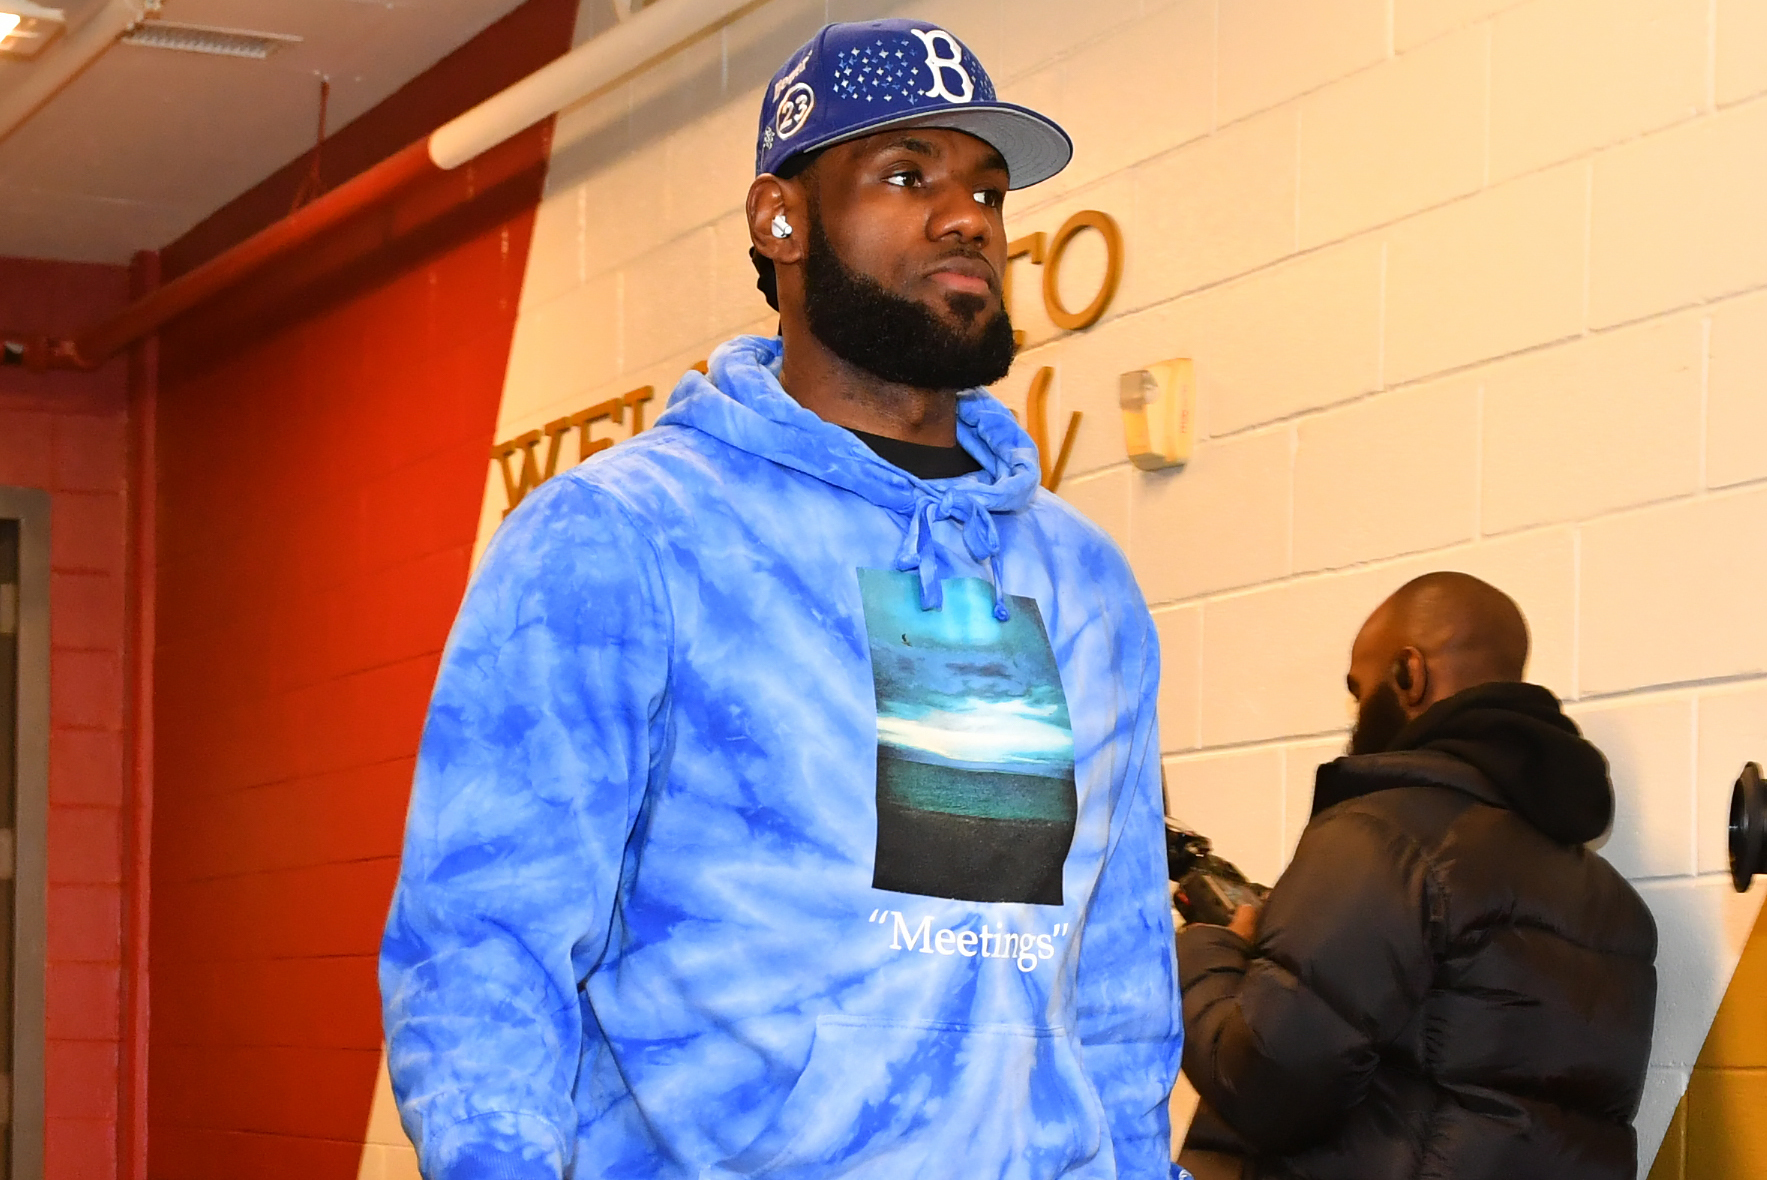 Fashion Policy Reverse by the NBA for Player's Pregame Outfits